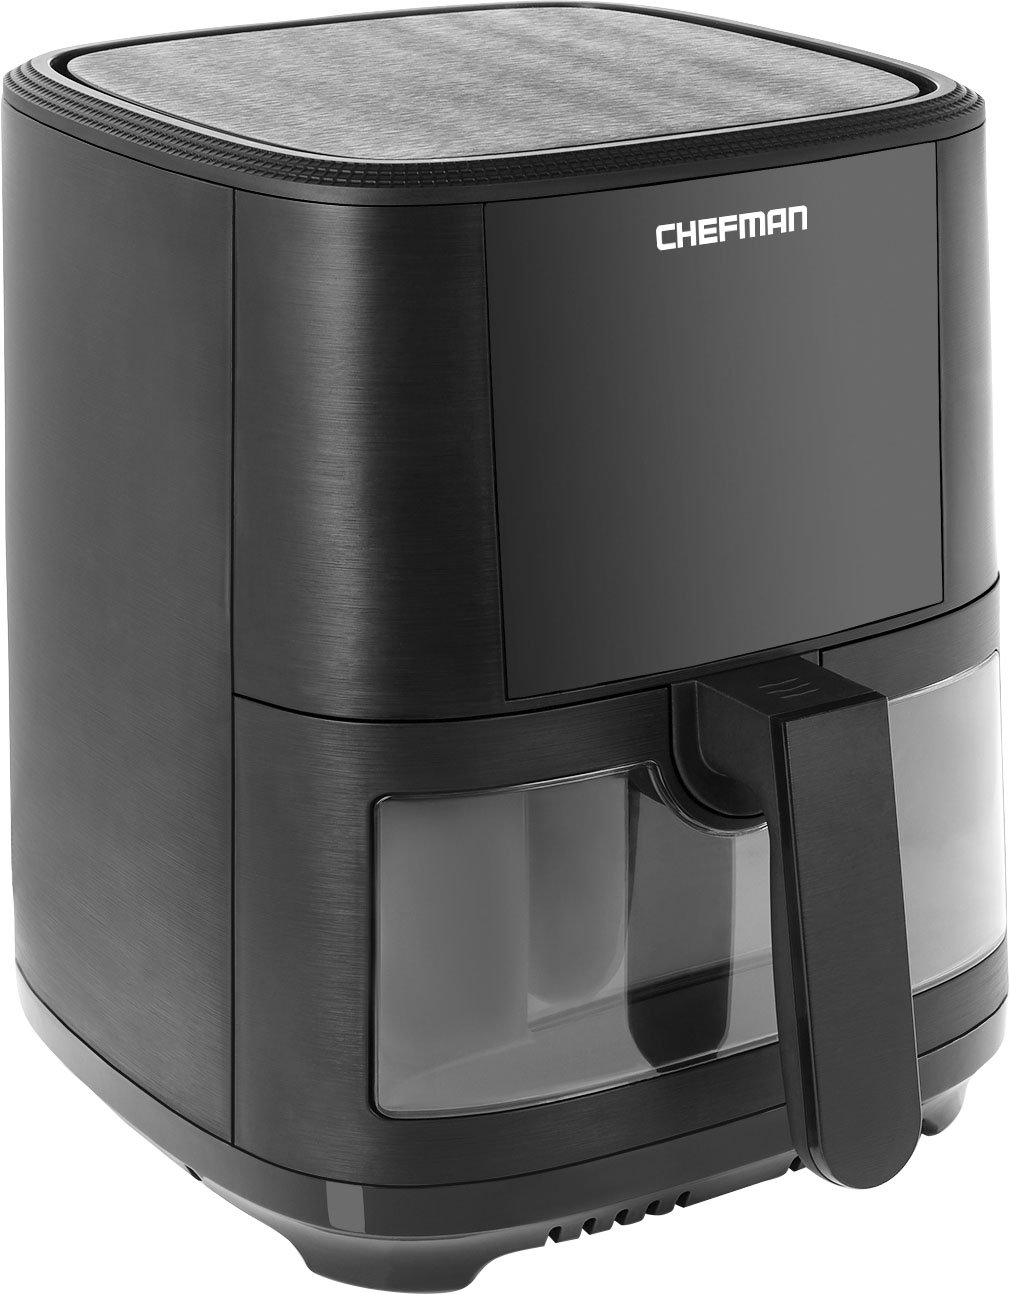 CHEFMAN 5-Quart Digital Air Fryer with Temperature Probe, 8 Customizable  Cooking Presets, Large Easy-View Window, Give Your Food an Extra Crispy